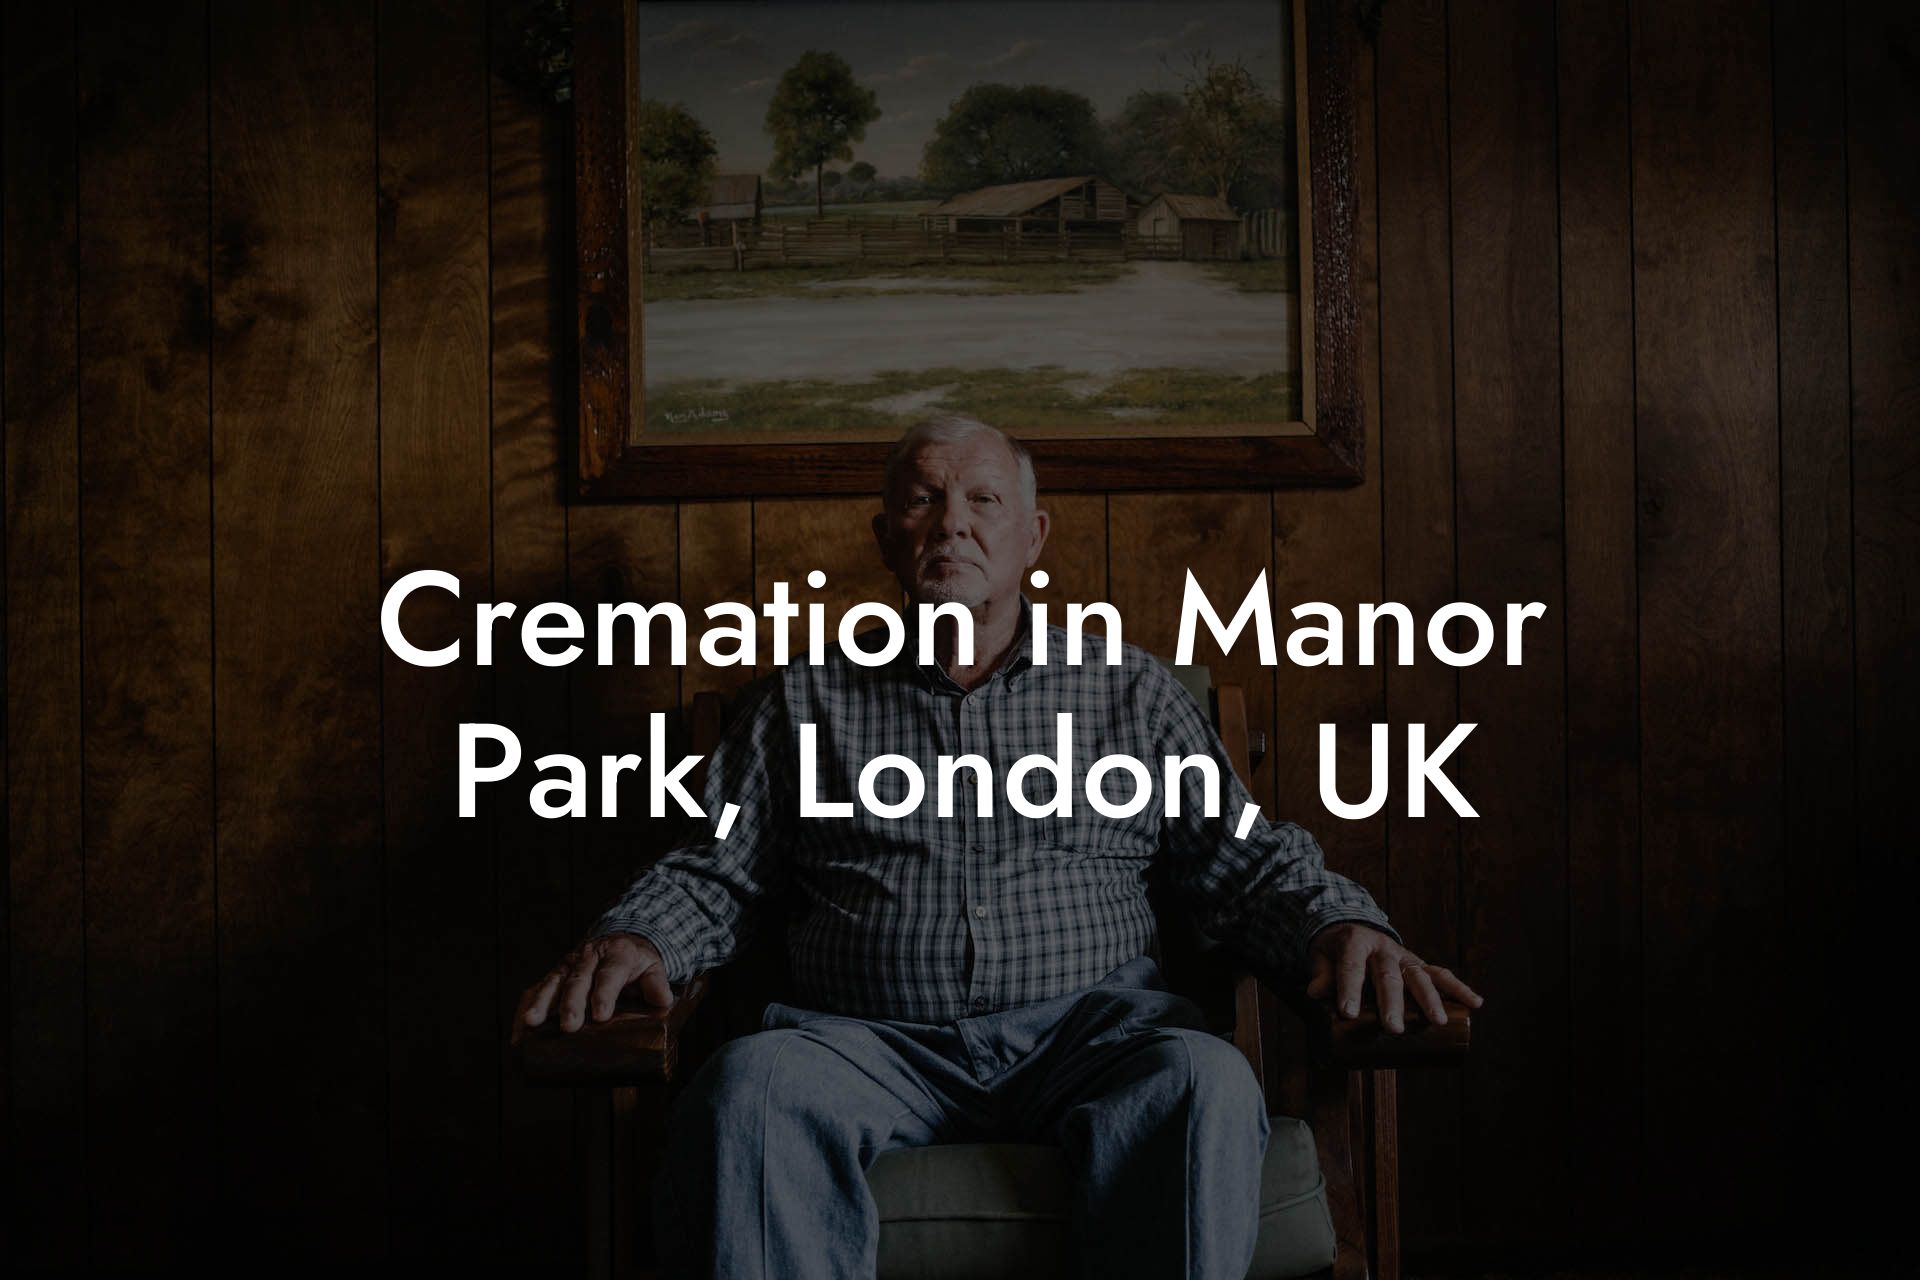 Cremation in Manor Park, London, UK